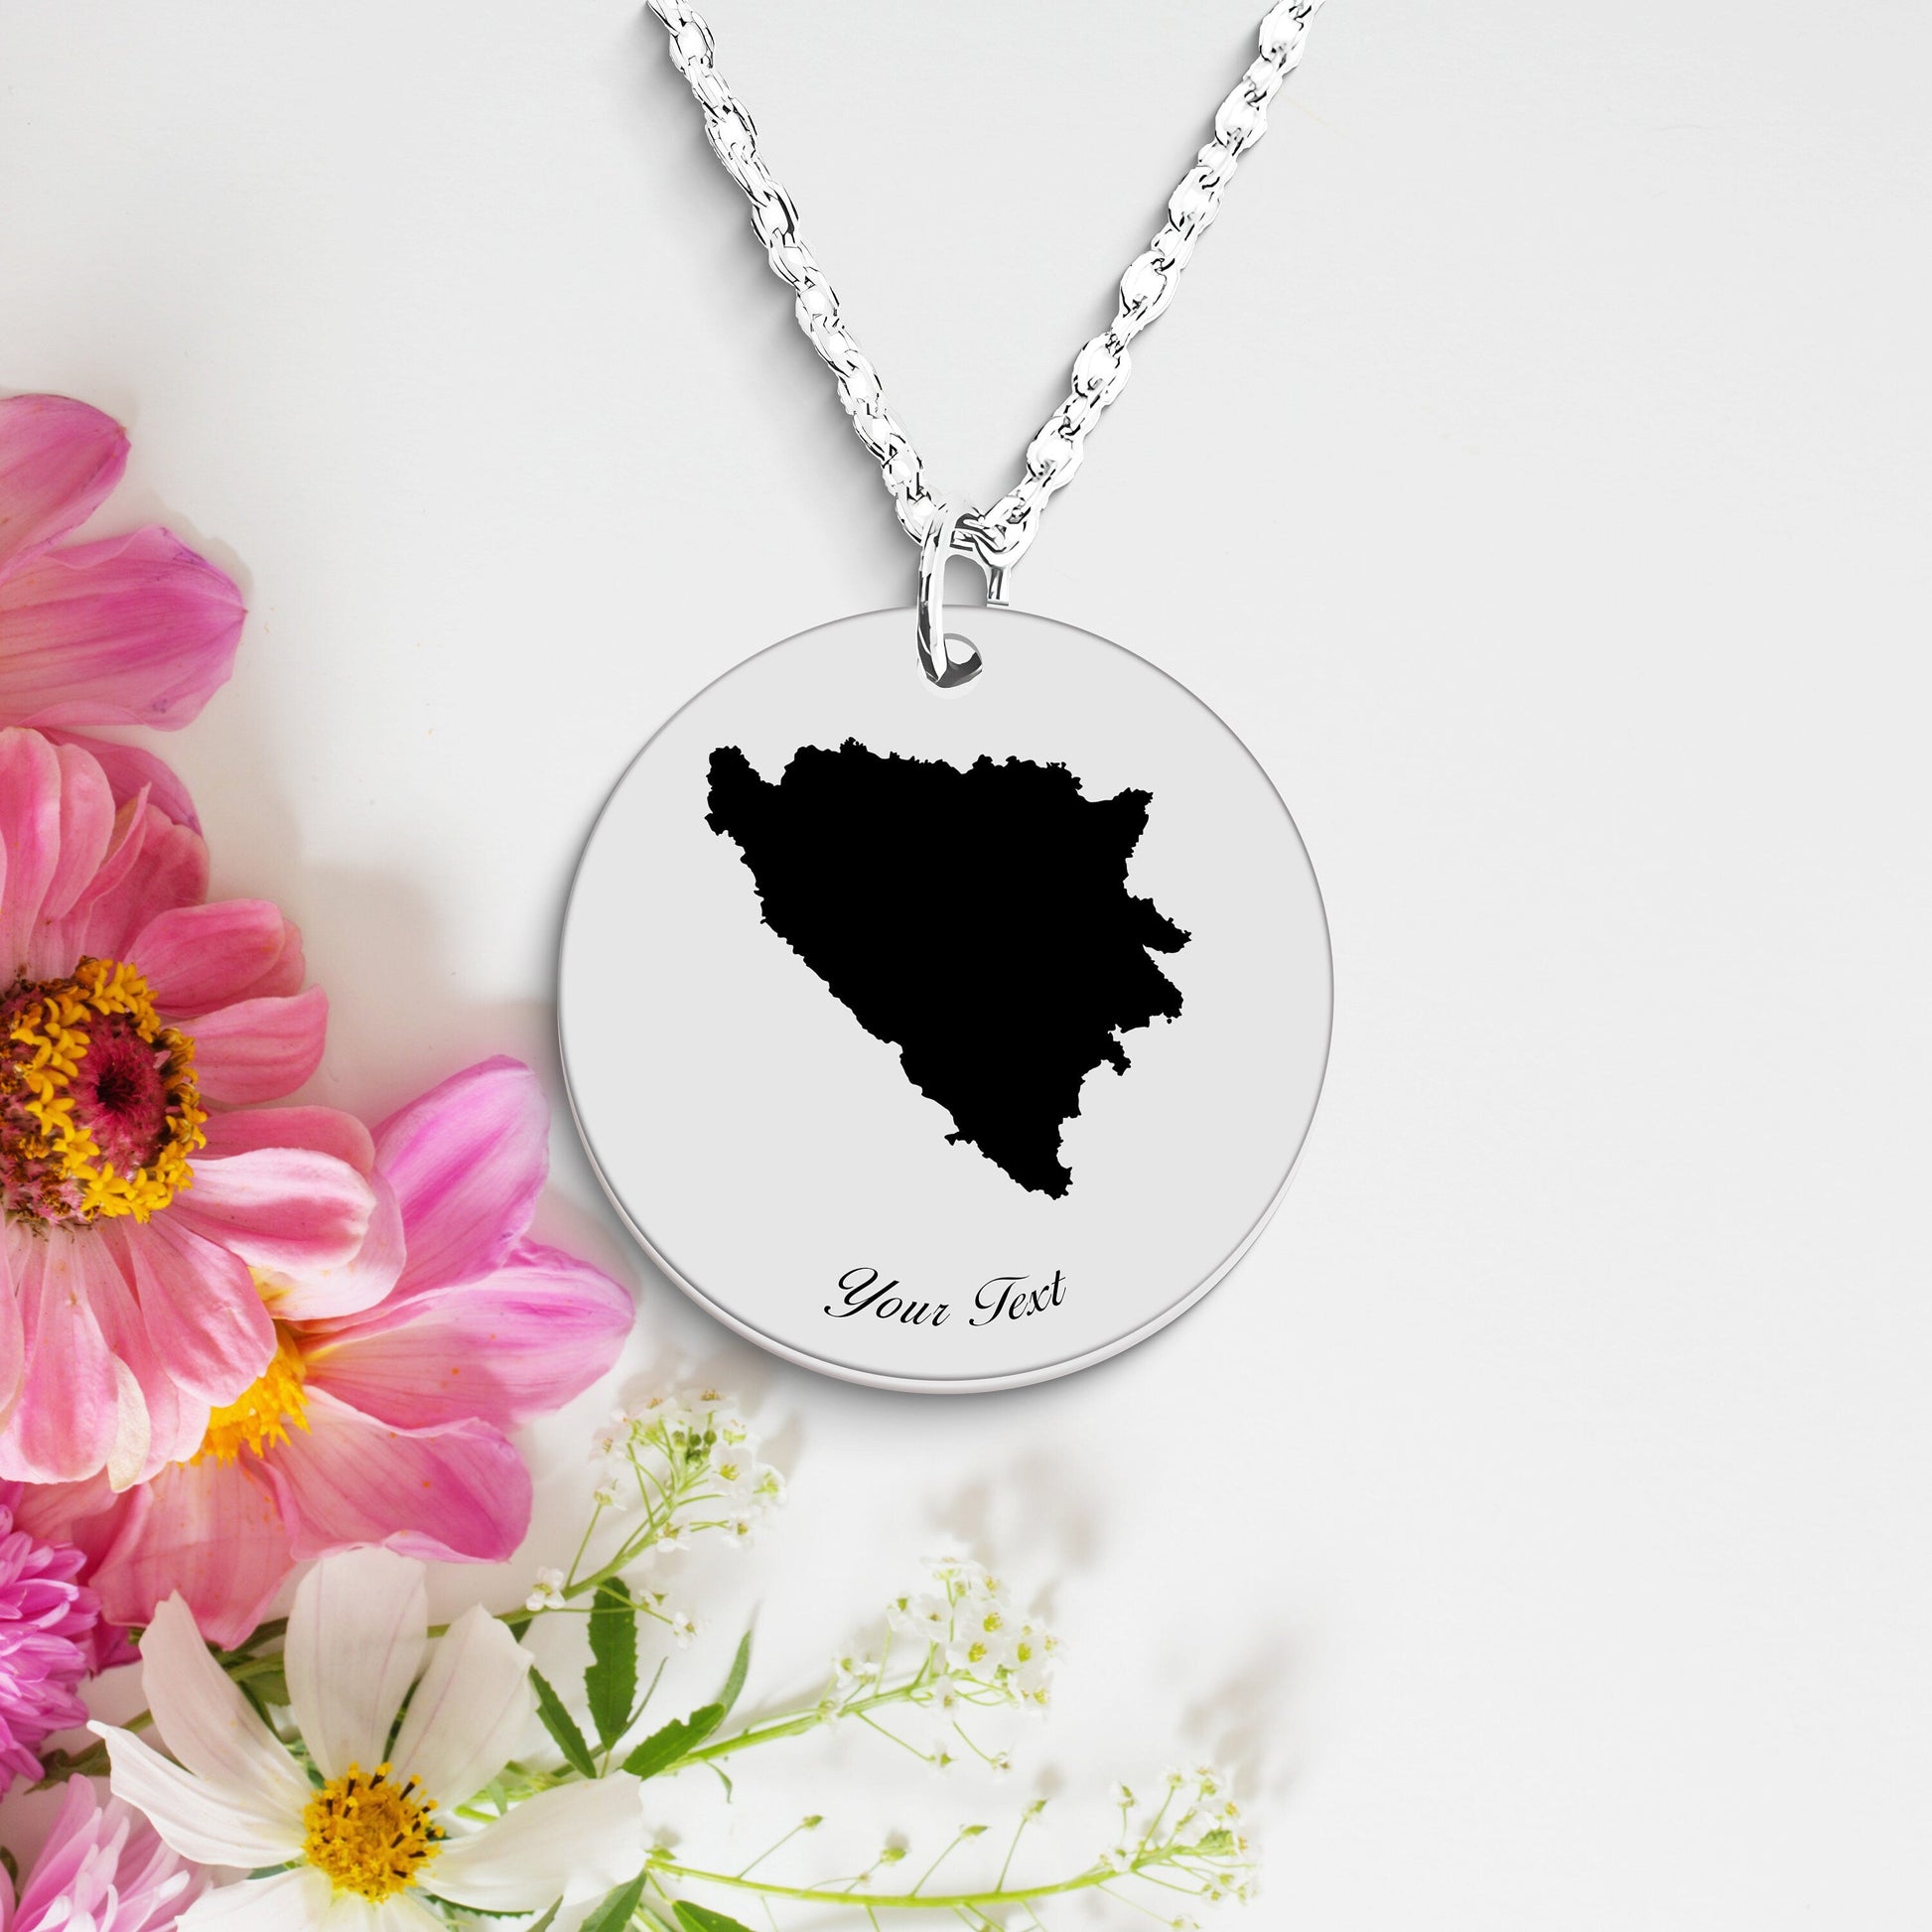 Bosnia and Herzegovina Country Map Necklace, Your Name Necklace, Minimalist Necklace, Personalized Gift, Silver Necklace, Gift For Him Her